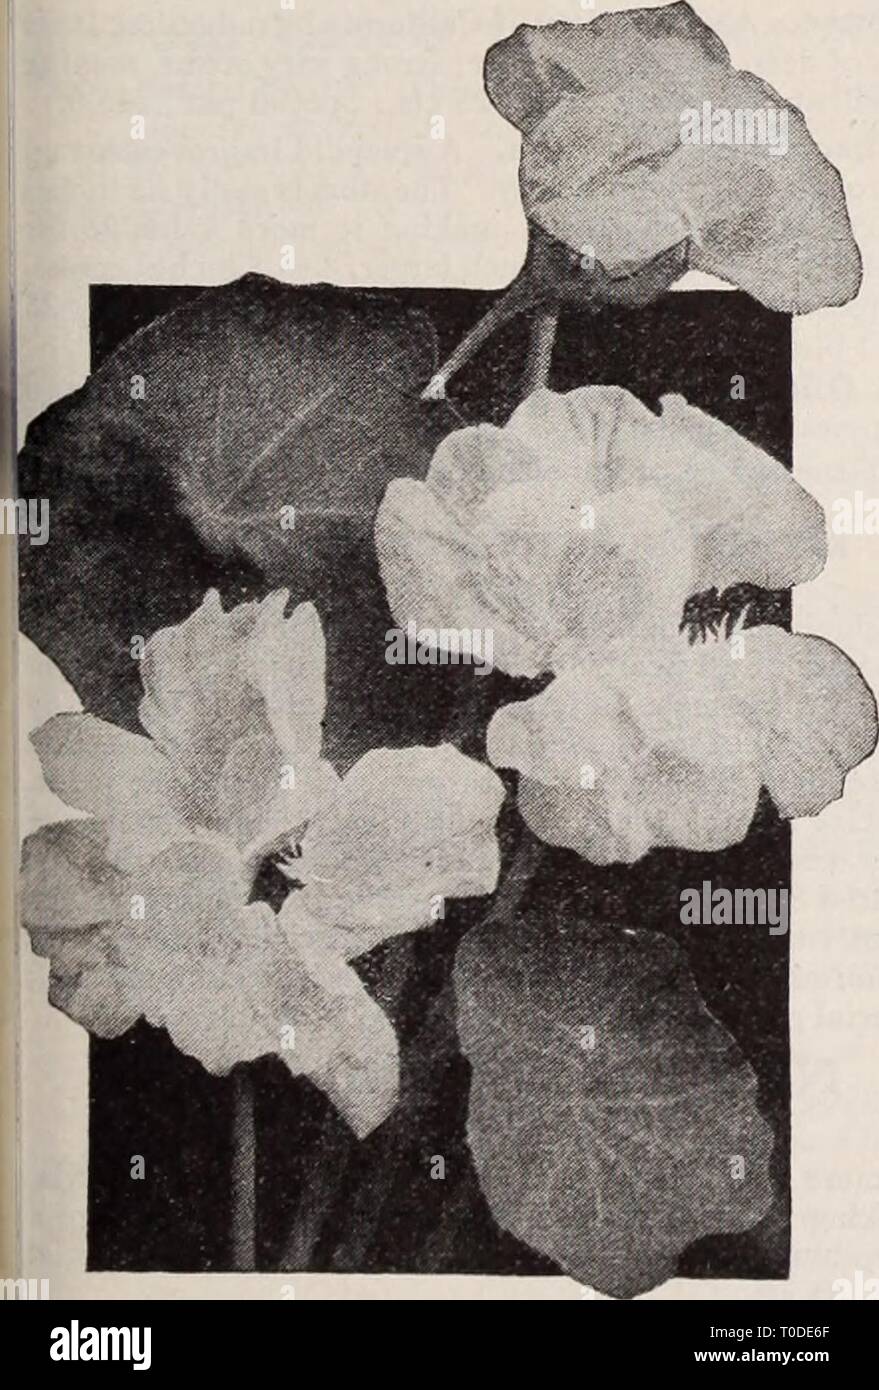 Dreer's garden book  Henry Dreer's garden book / Henry A. Dreer. dreersgardenbook1931dree Year:   Meconopsis Regia (New)    Double Nasturtium, Golden Gleam Nicotiana Sanderae Crimson King 3415 The Tuberose-flowered Tobacco has always been popular for its sweet scented, long tubular flowers. This new variety has dark velvety crimson red flowers, the richest tint yet produced. Pkt., 10 cts.; i oz., 30 cts. (For General List of Nicotianas, see page 88.) Swiss Giant Pansies The plants are of unusually robust habit. The very large flowers of heavy texture are held well above the foliage on long str Stock Photo